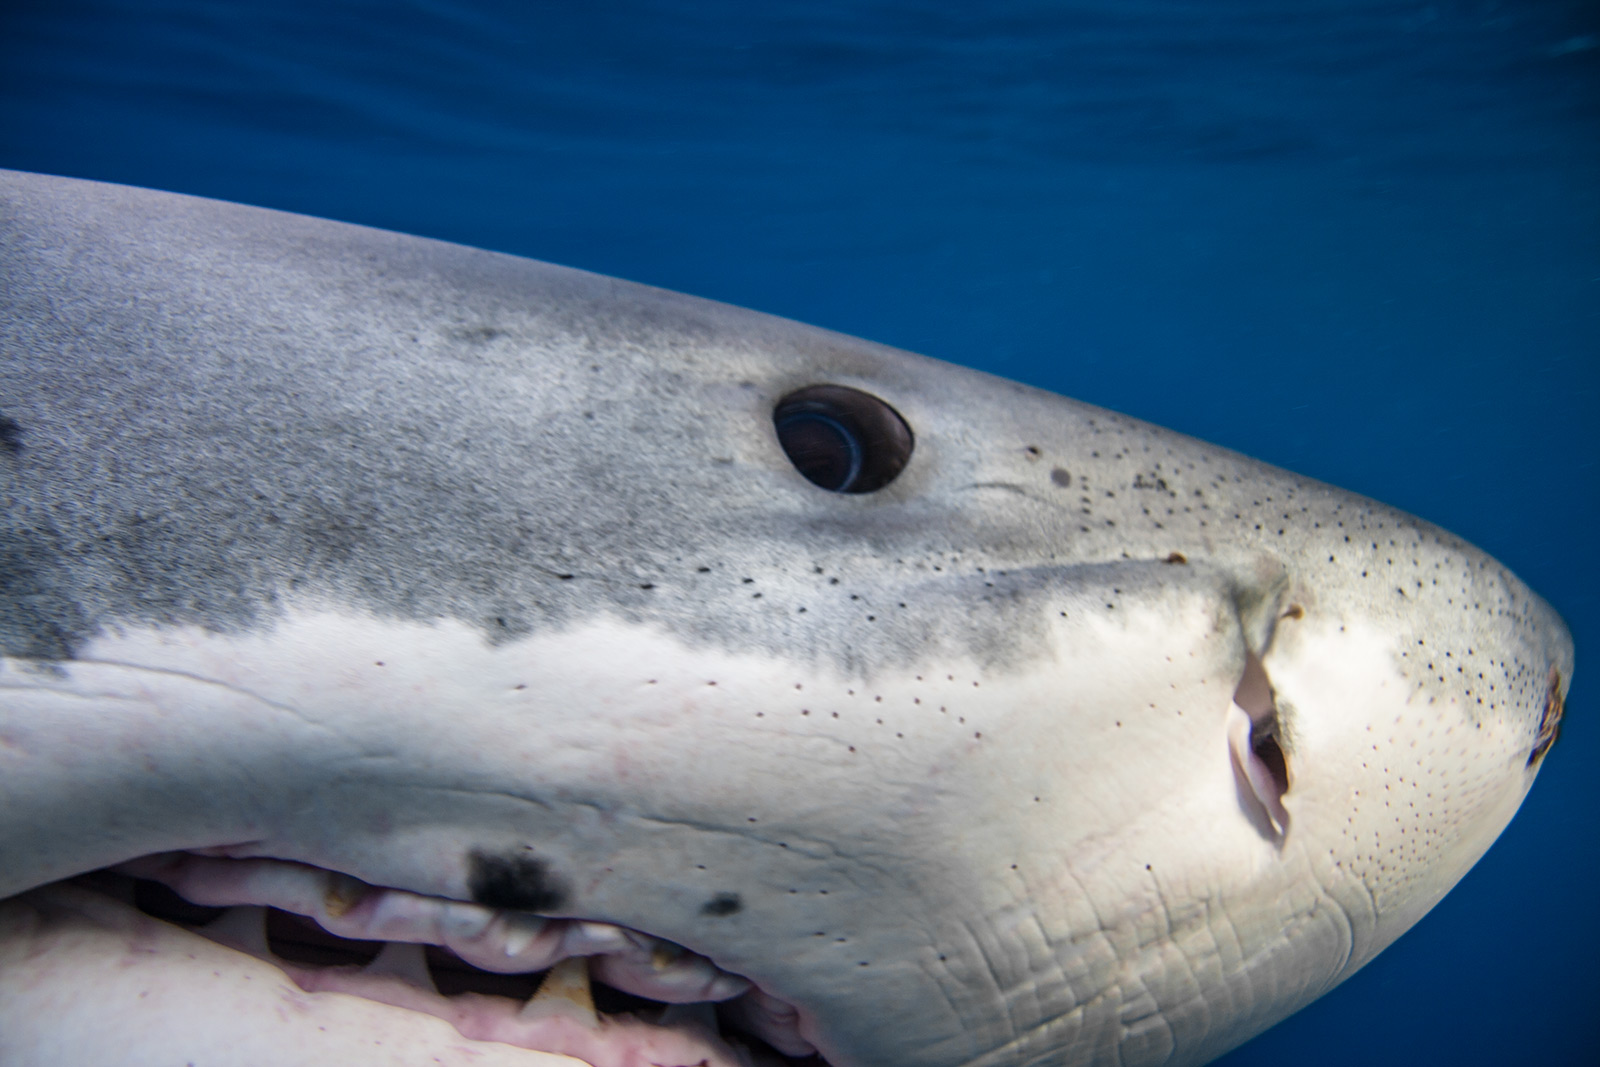 A close-up shot of a great white shark's eye, mouth, and snout image